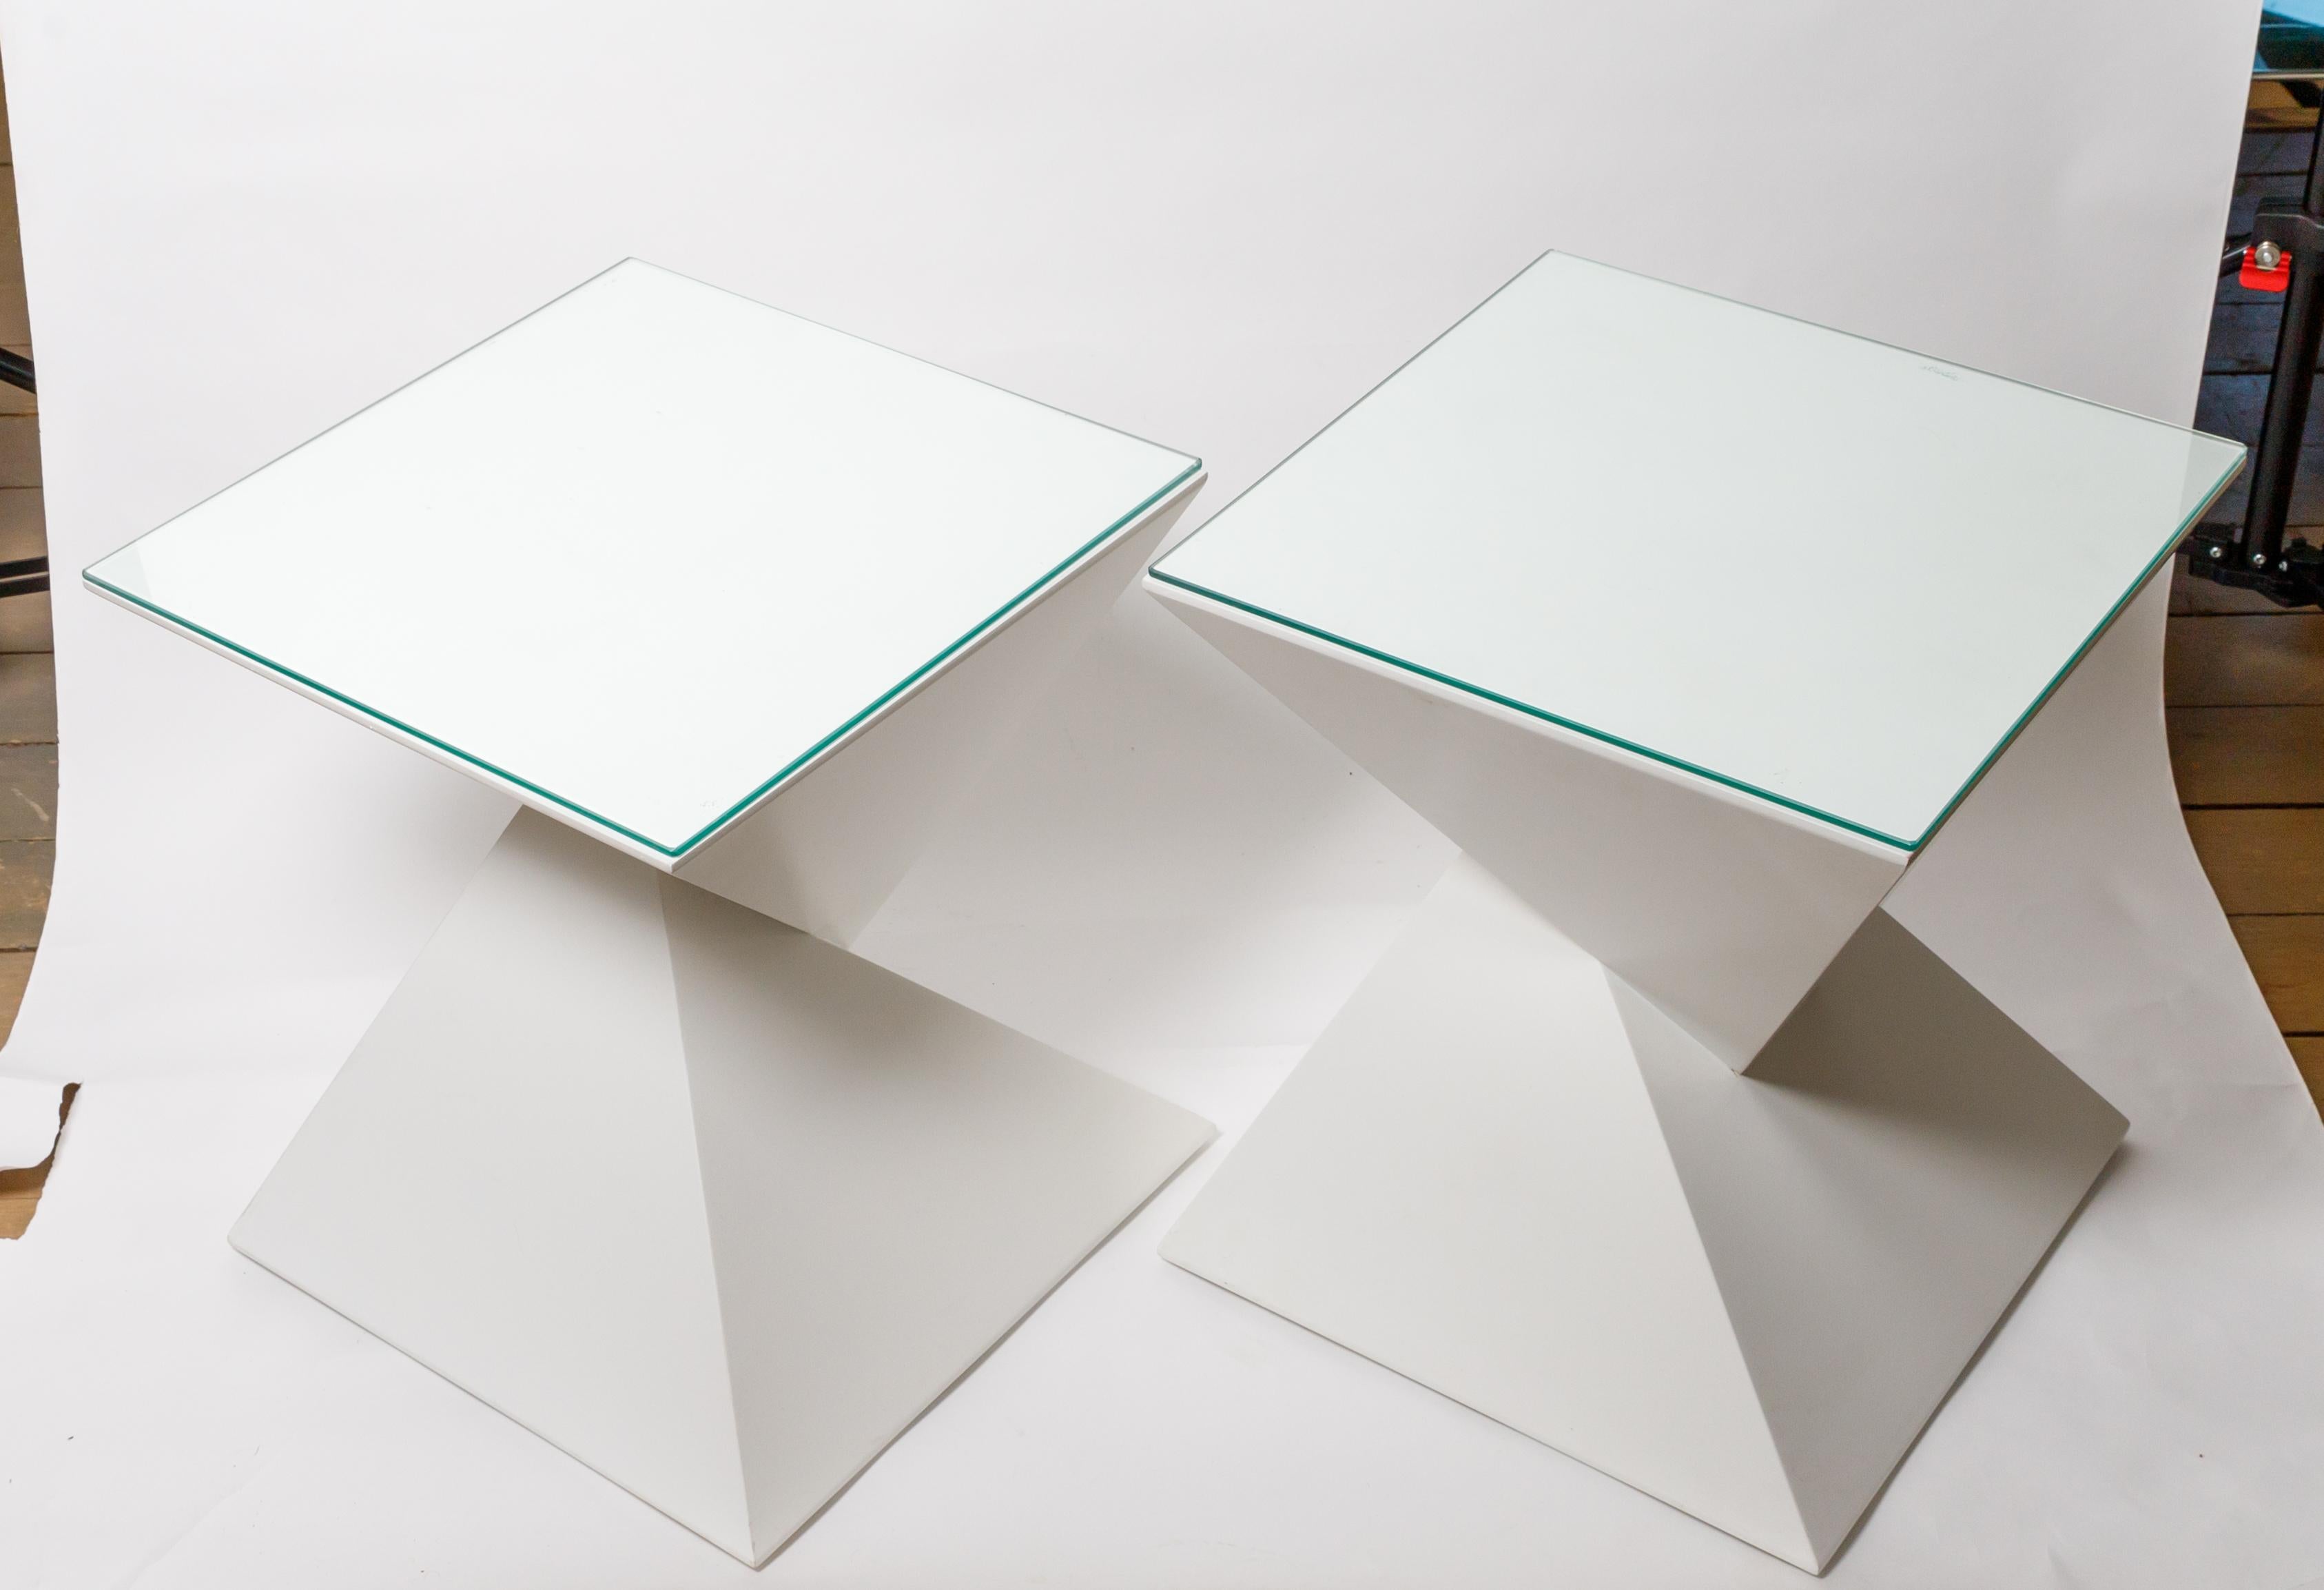 Pair of painted wood, angular, geometric side tables with glass tops.